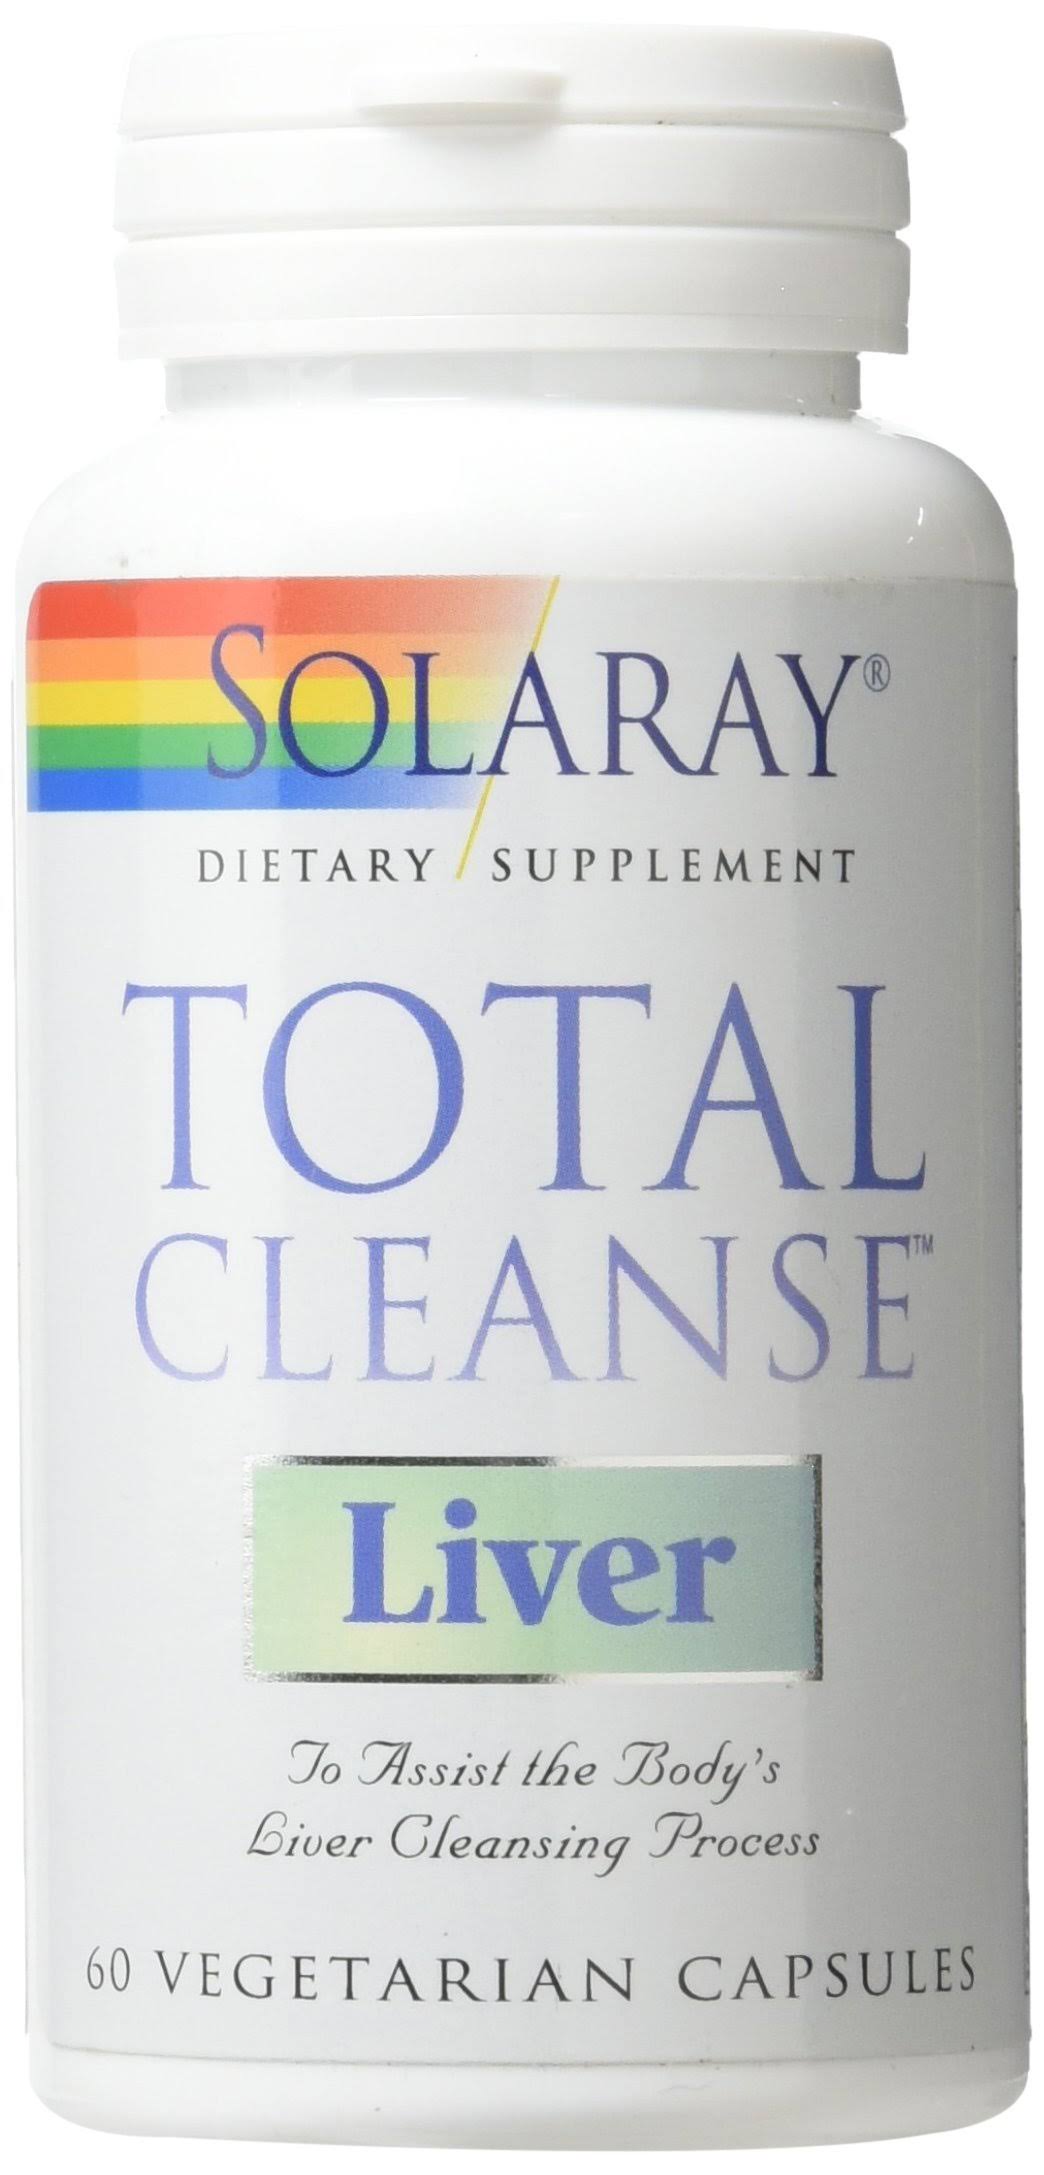 Solaray - Total Cleanse Liver, 60 Capsules